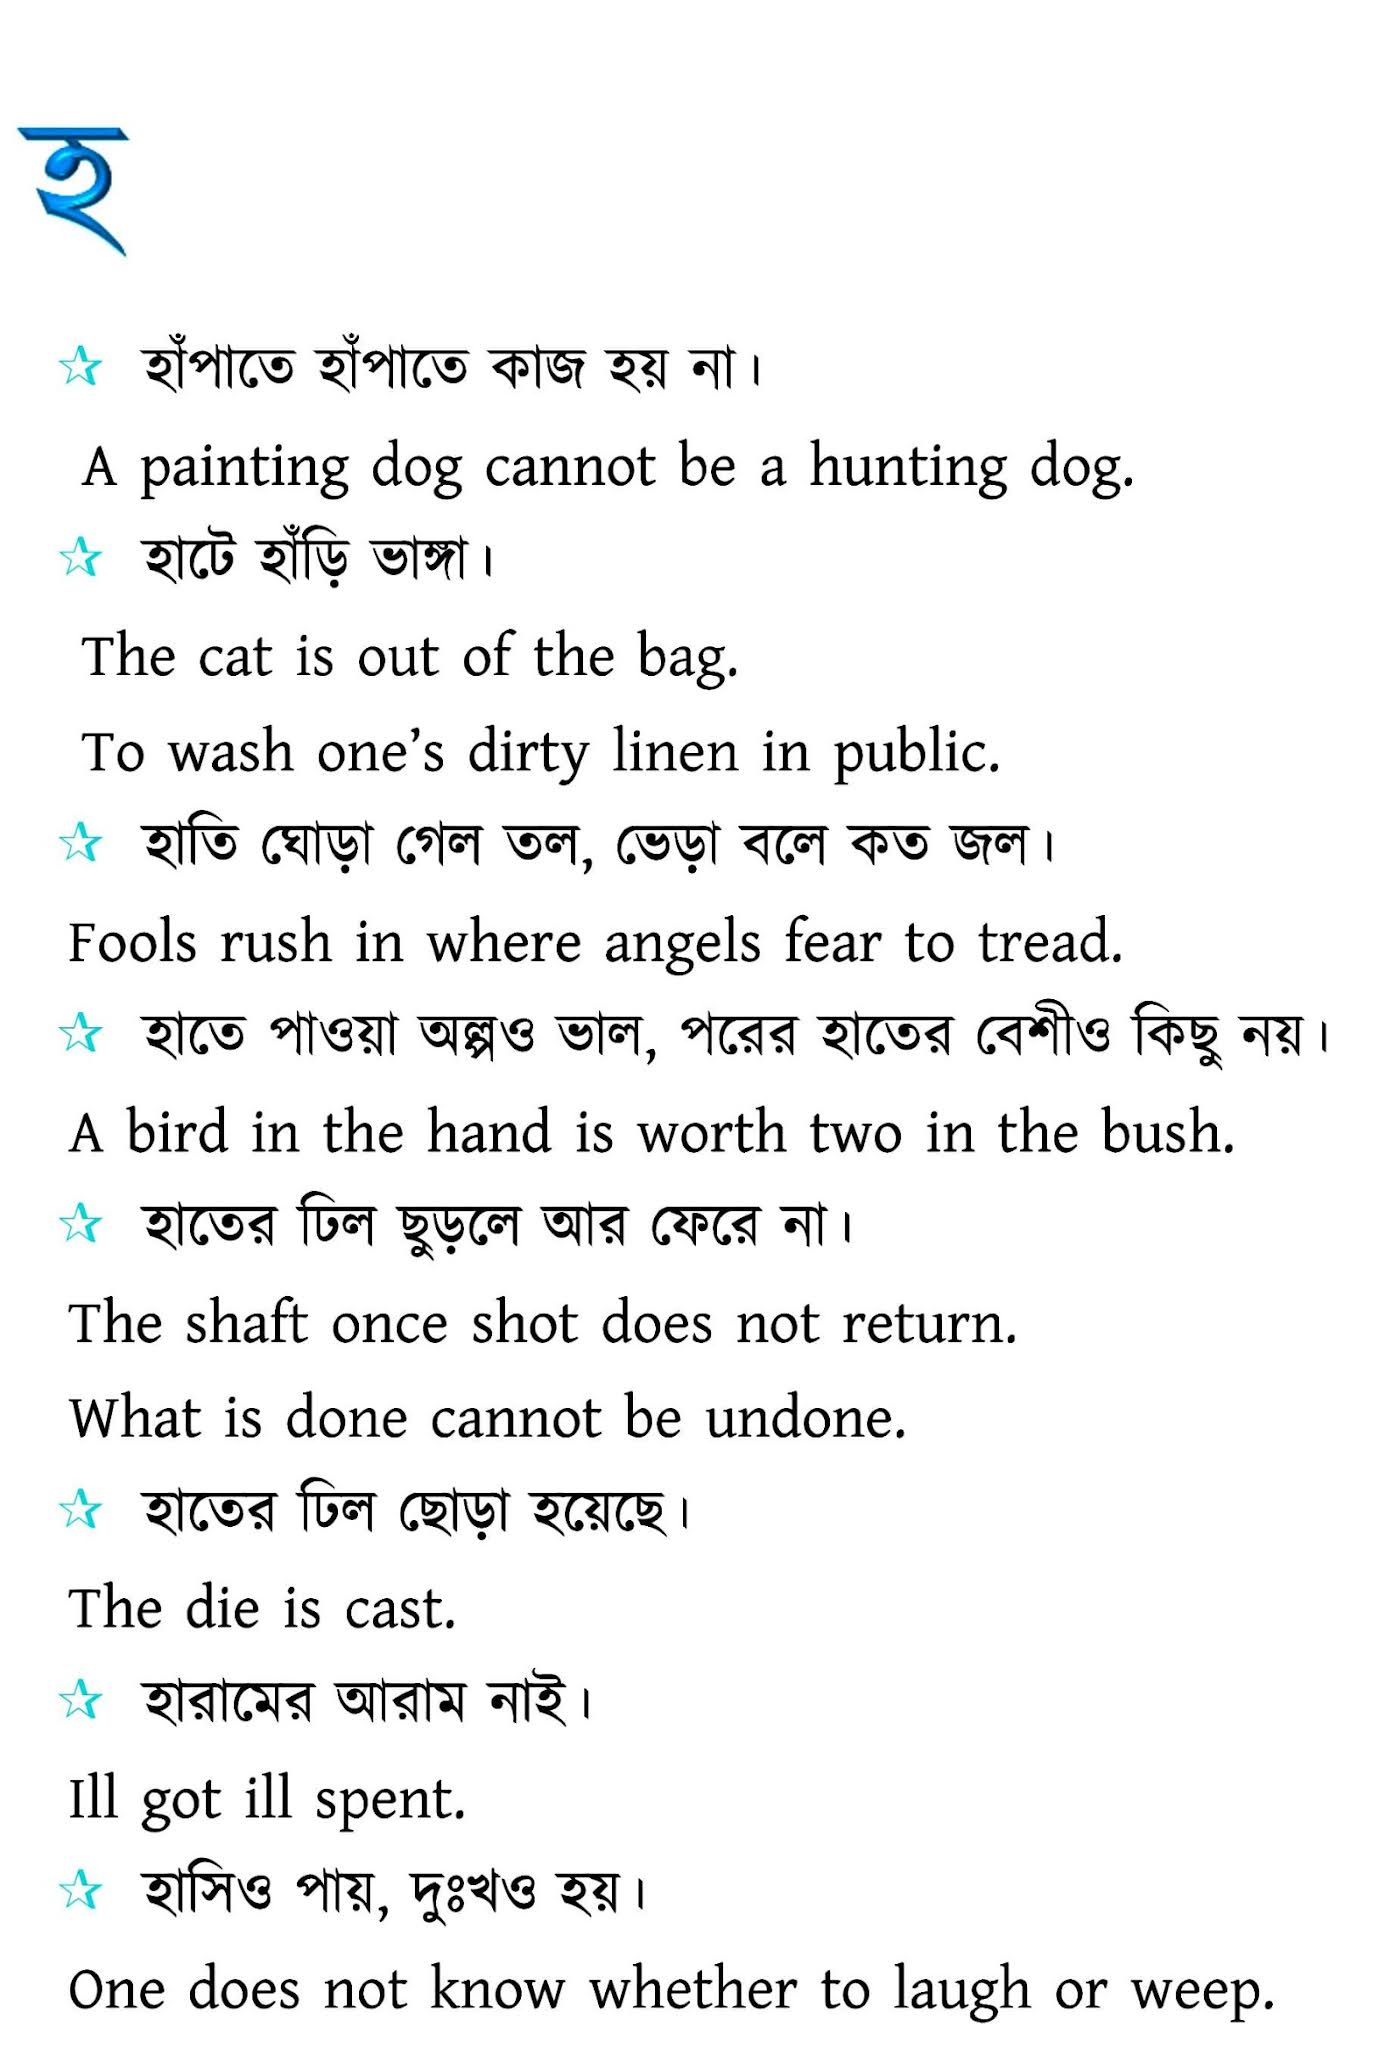 500+ Proverb With Bengali Meaning - WBCS Notebook